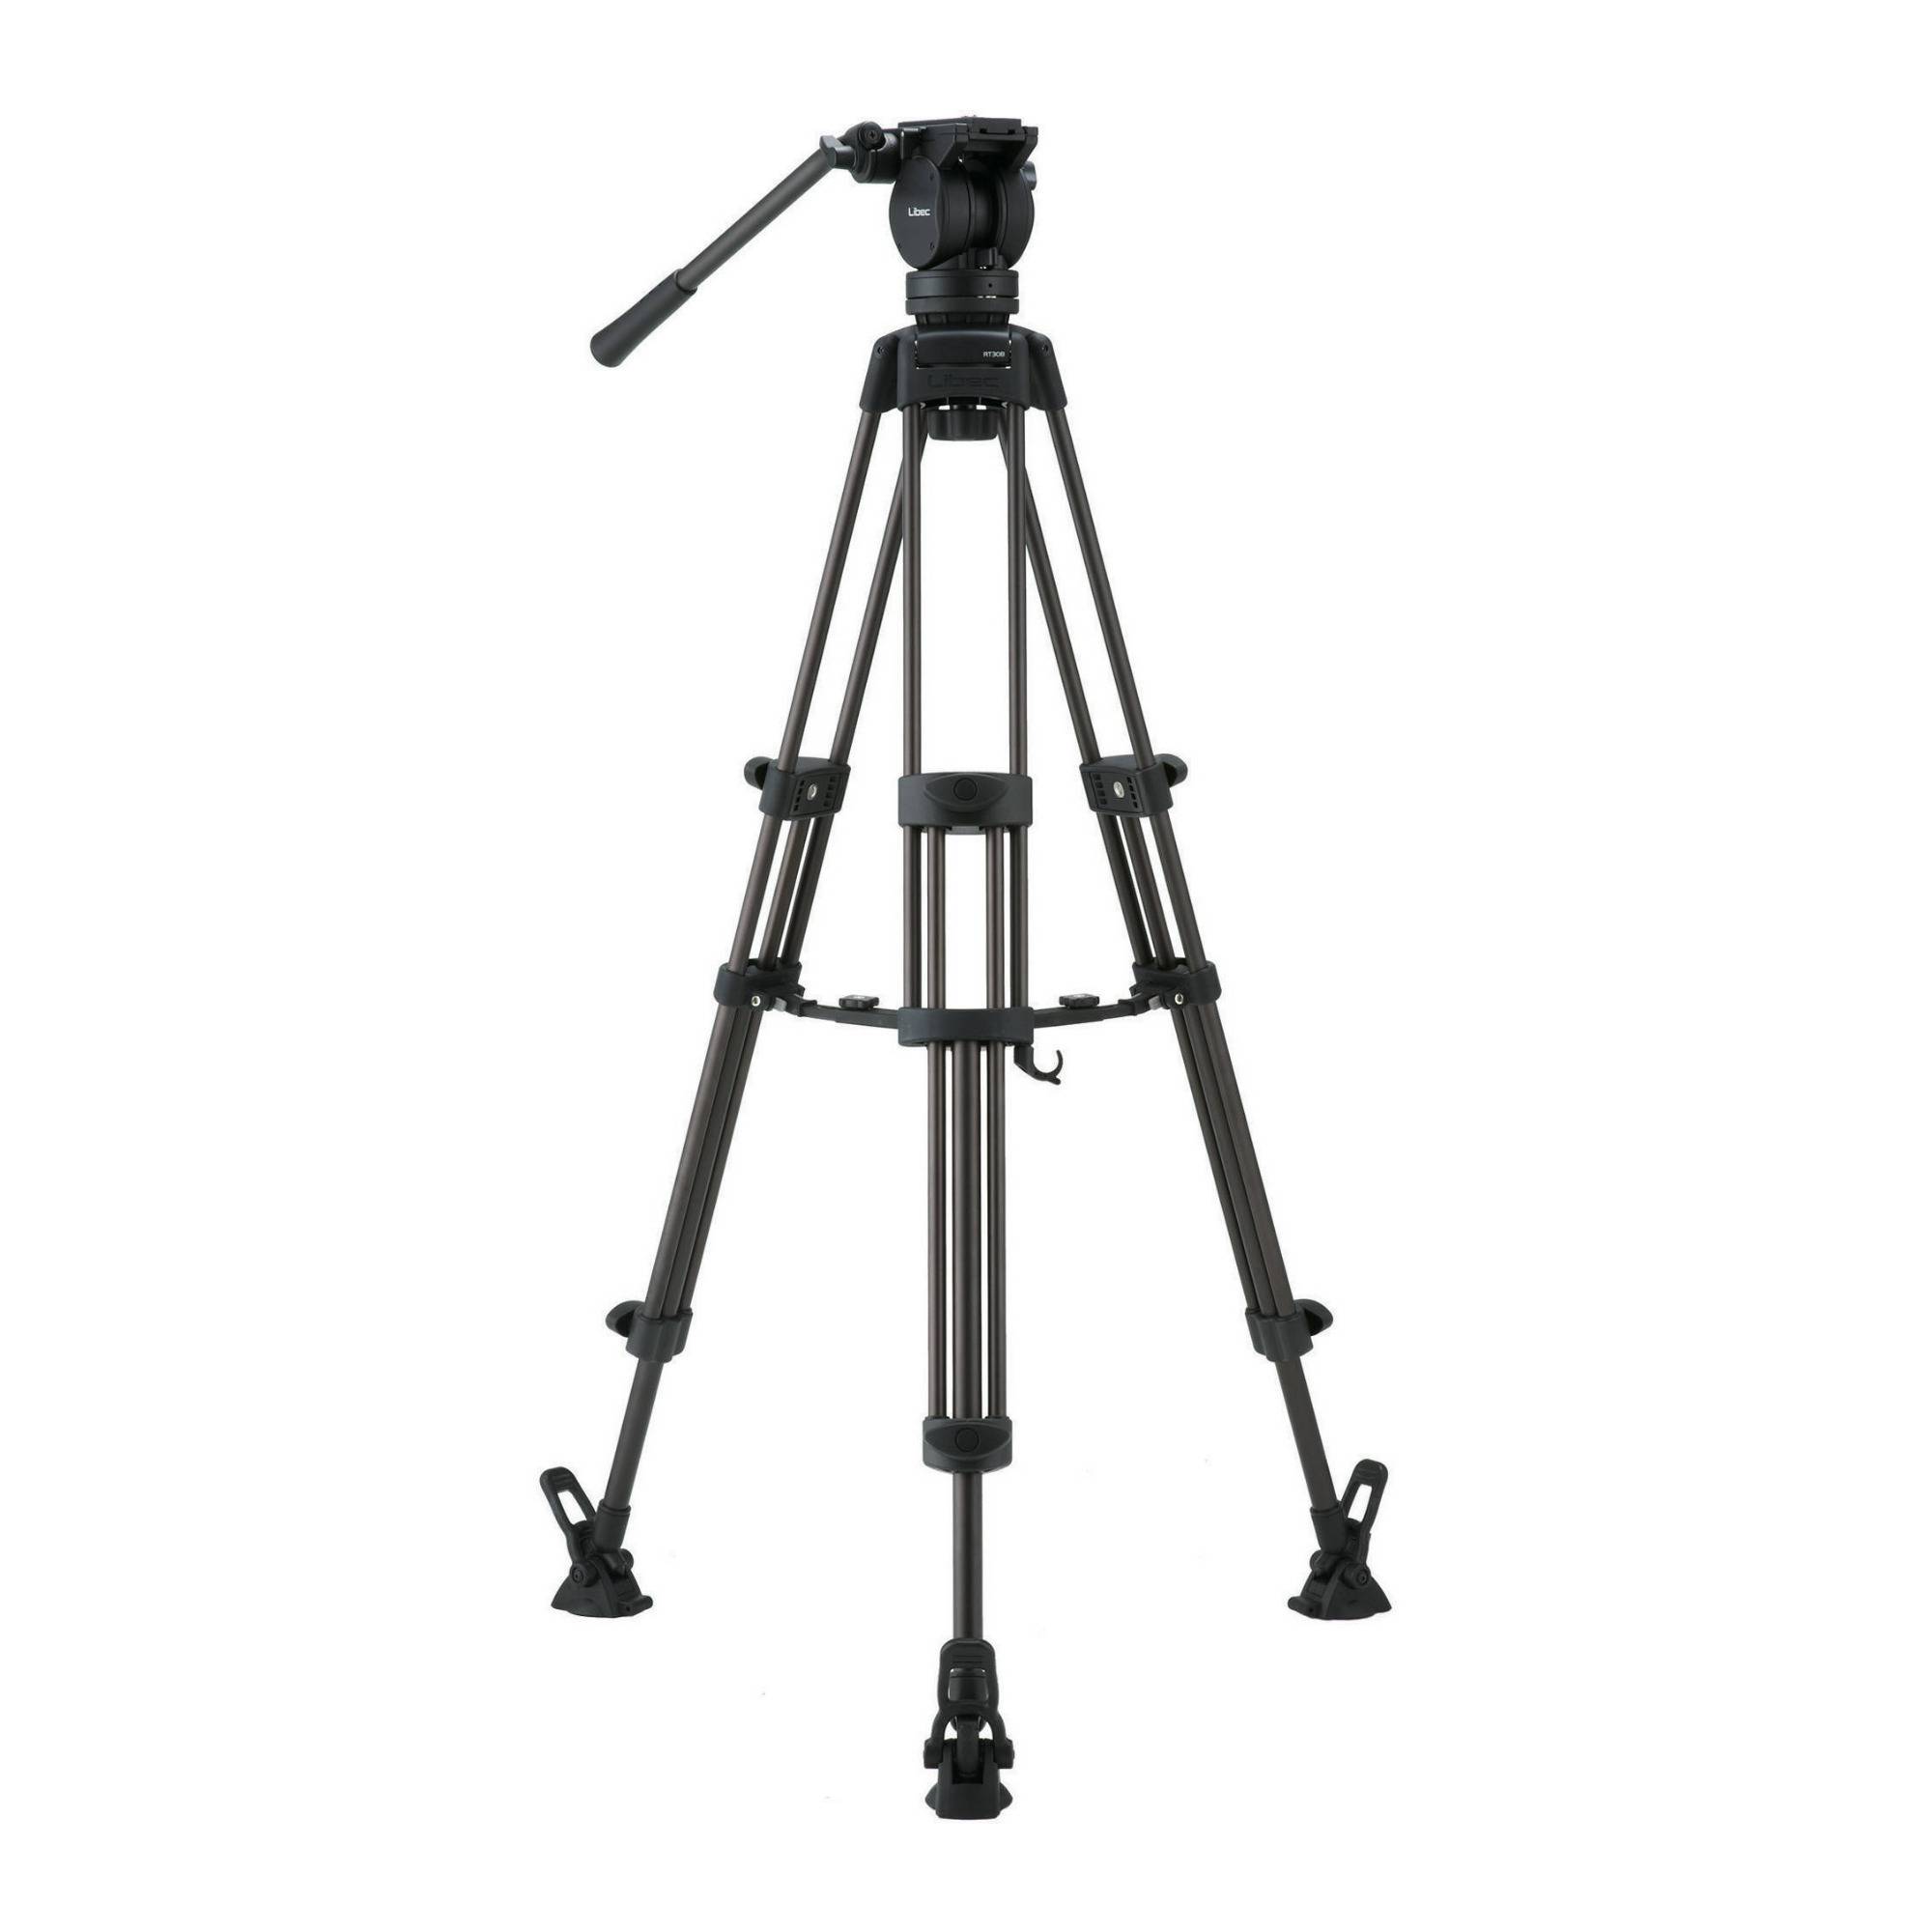 Libec LX7 M Tripod System with Pan and Tilt Fluid Head, Mid-Level Spreader, Rubber Feet, and Case